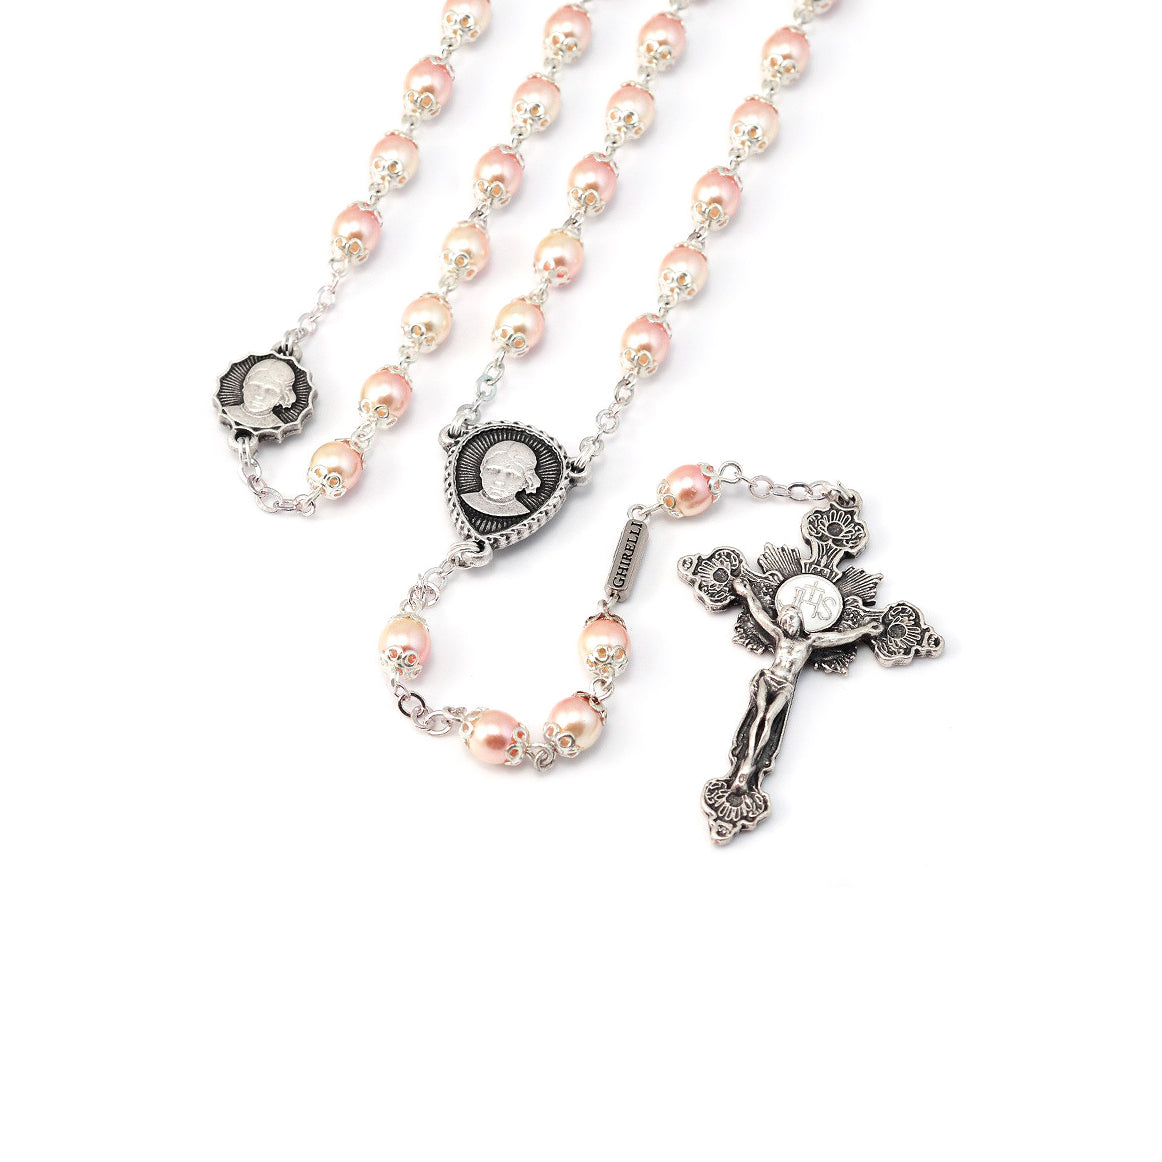 Pinky Gold filled Rosary Centerpiece, Cross, Jesus, Saint, Double